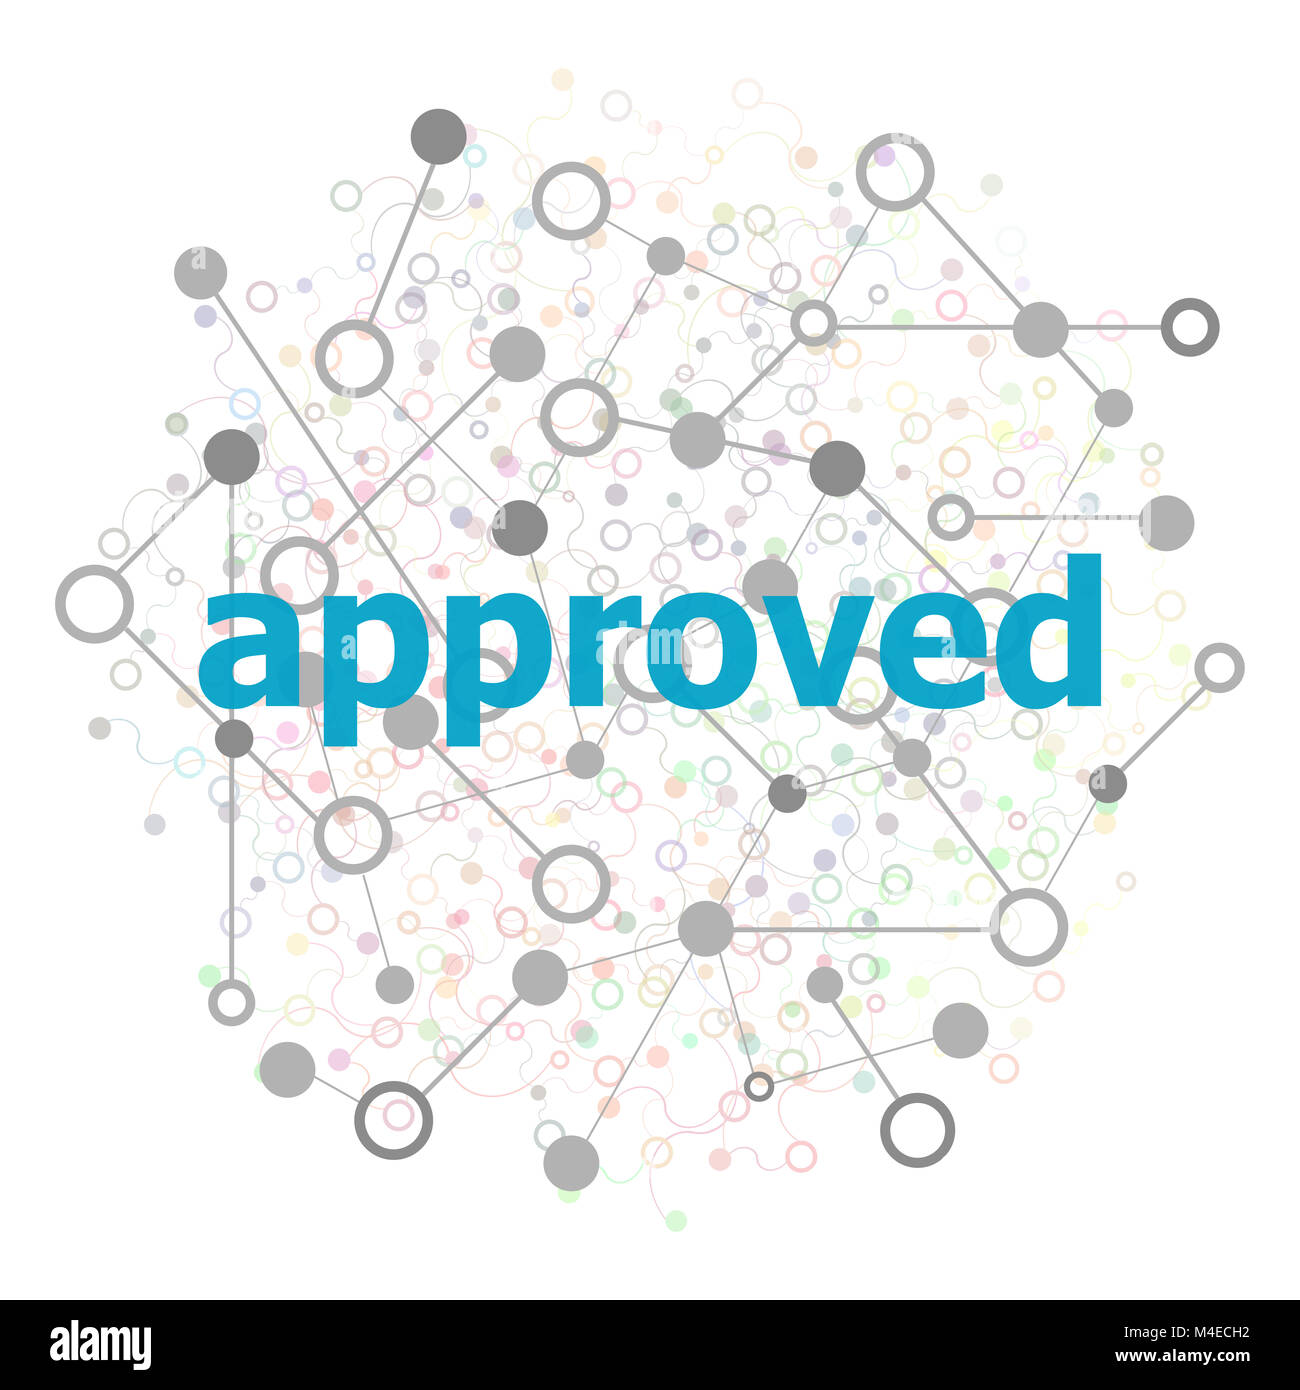 Text Approved. Advertising concept. Connecting dots and lines Stock Photo